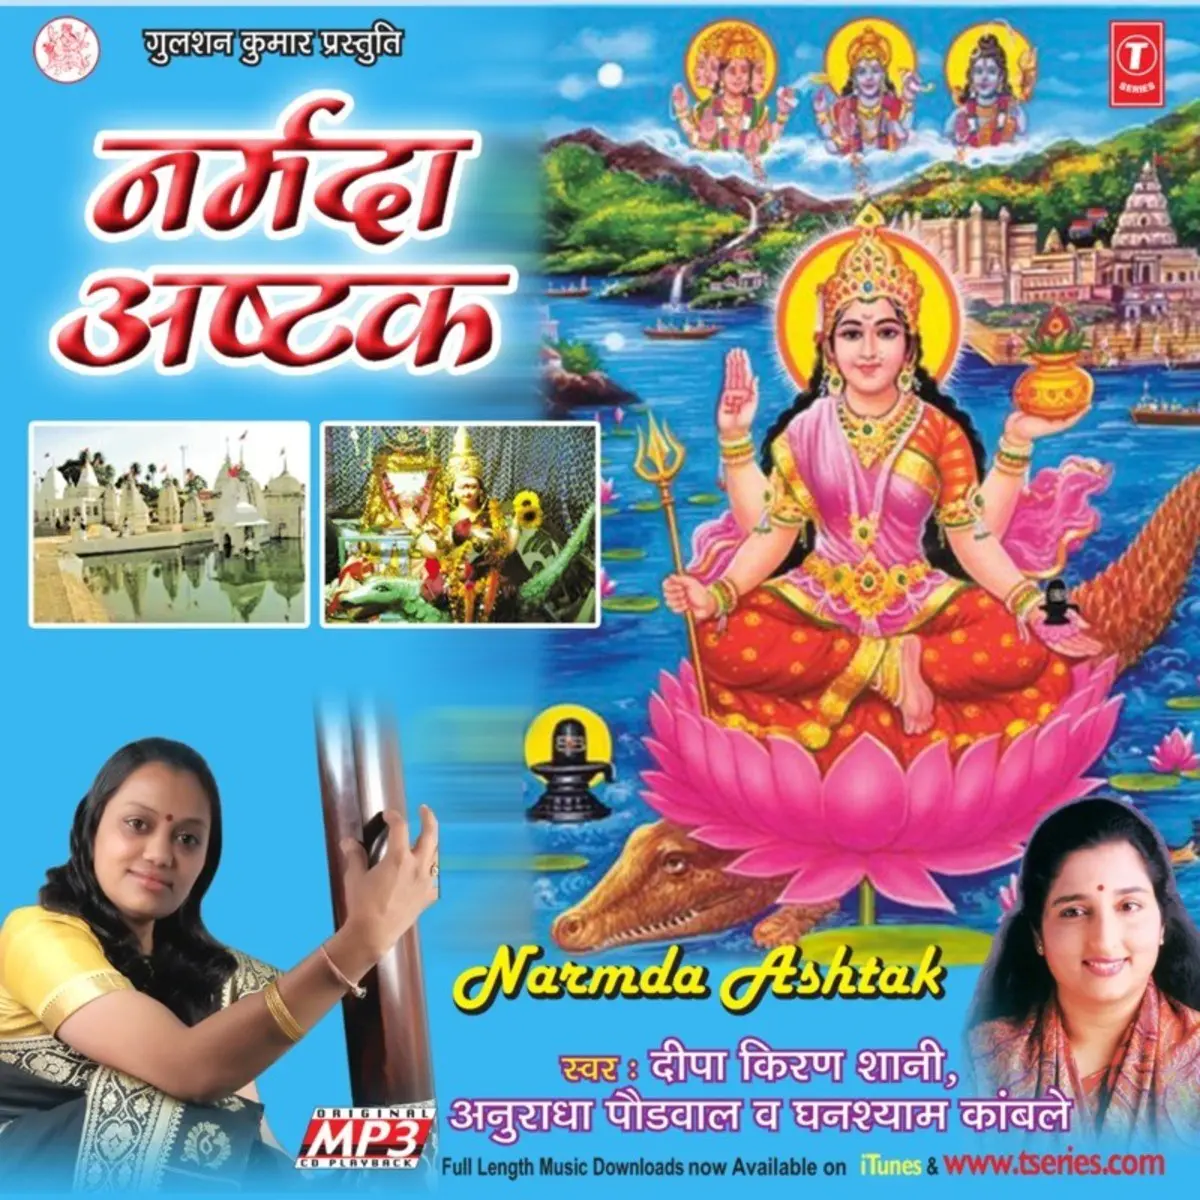 Narmada Ashtak Songs Download Narmada Ashtak Mp3 Songs Online Free On Gaana Com Find the latest music here that you can only hear elsewhere or download here. narmada ashtak mp3 songs online free on